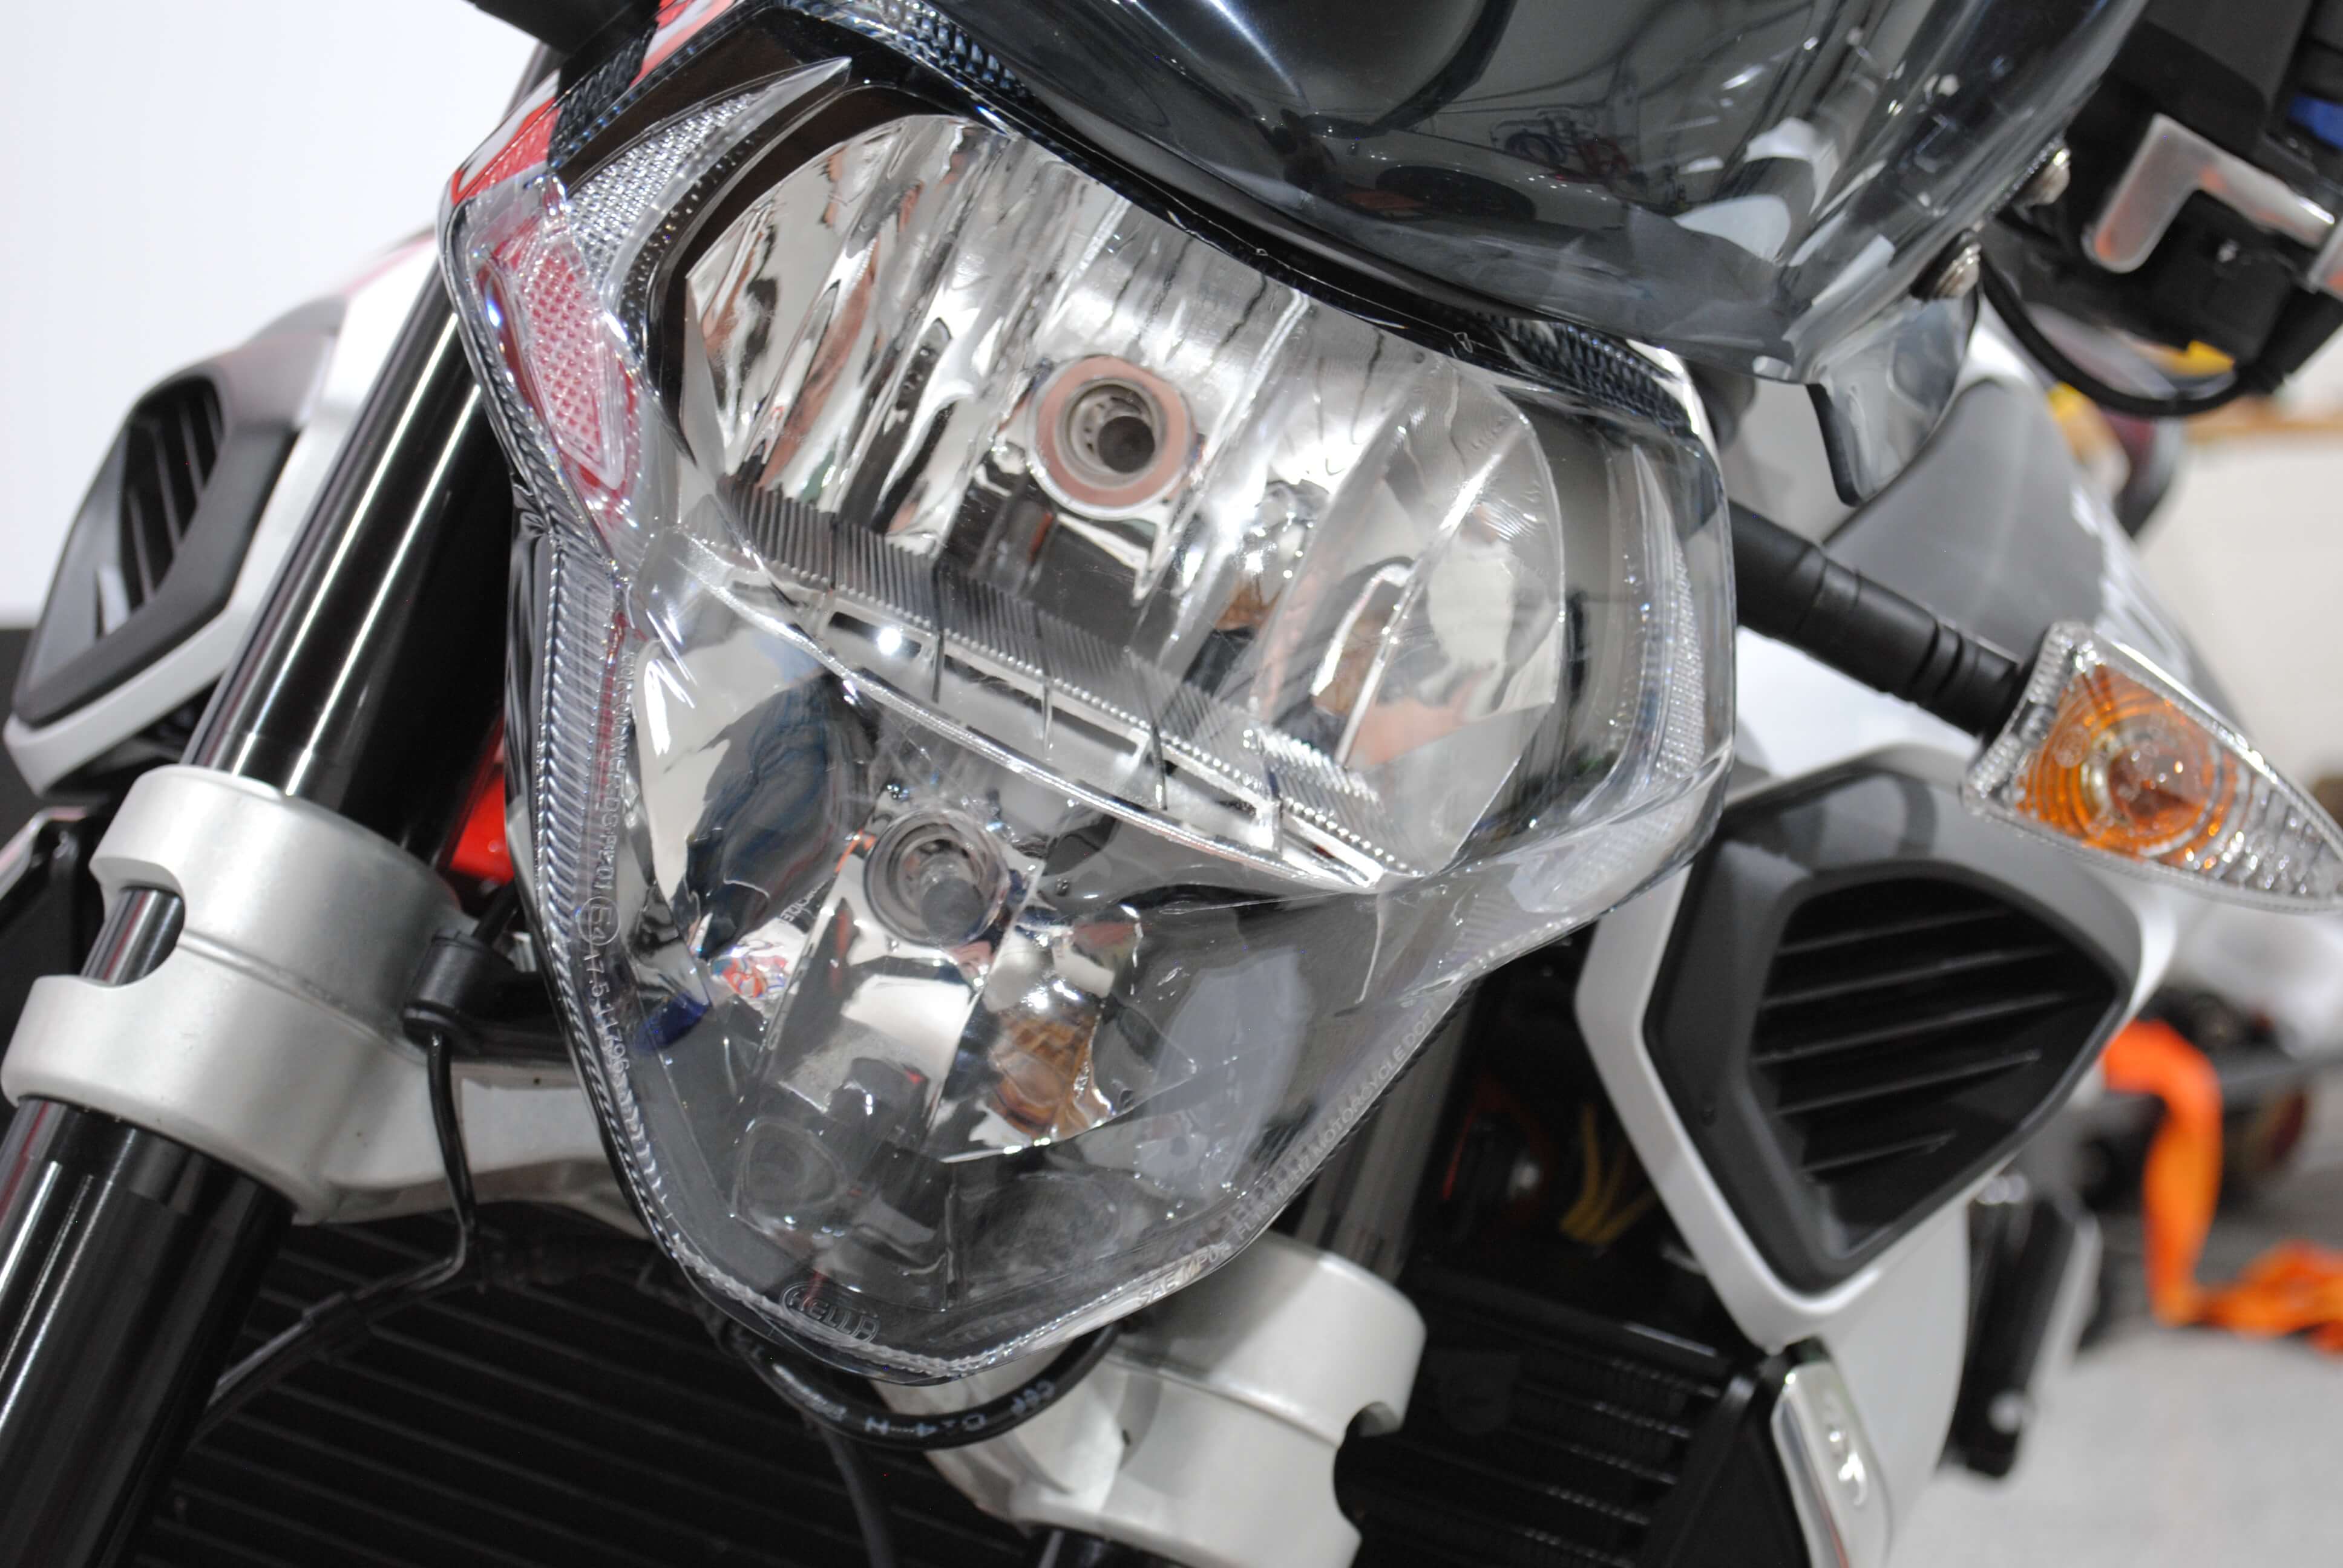 Applying Protective Film to Your Motorcycle